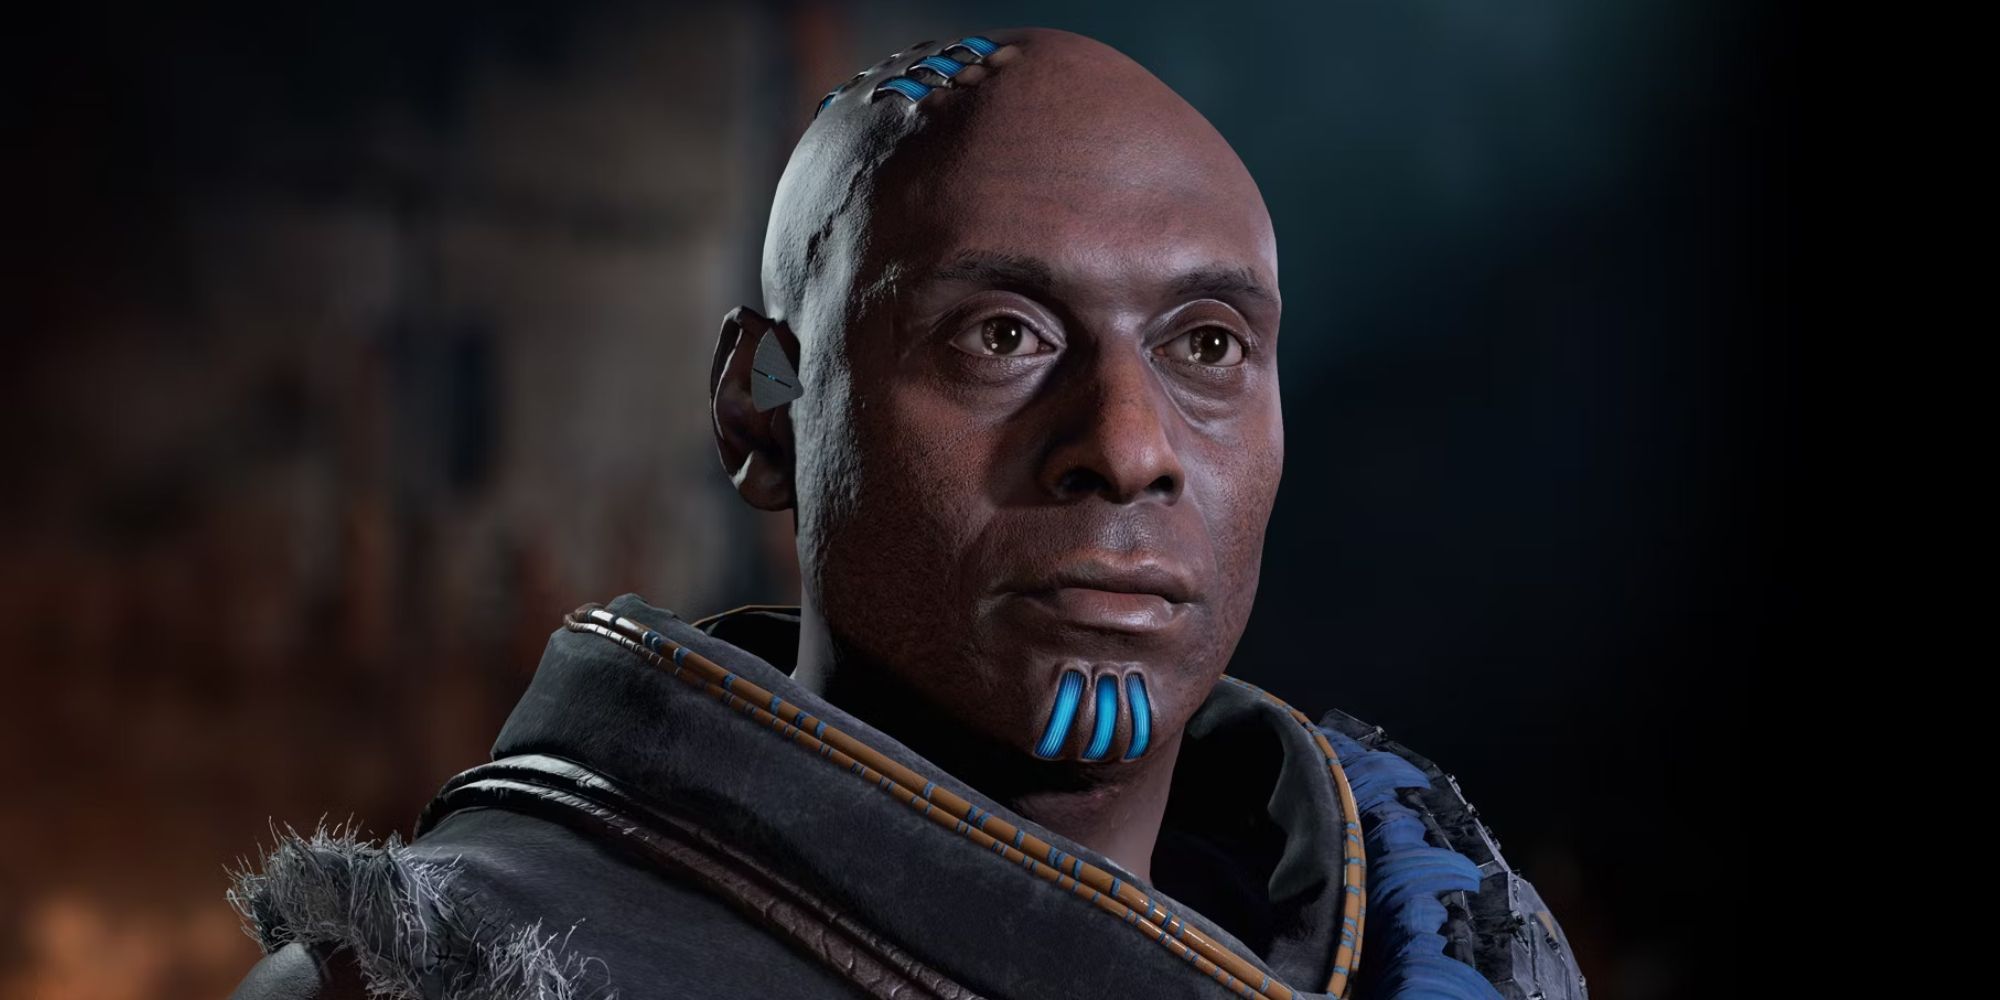 Destiny 2 Community Pays Tribute To Zavala Actor Lance Reddick, Who Passed  Away At Age 60